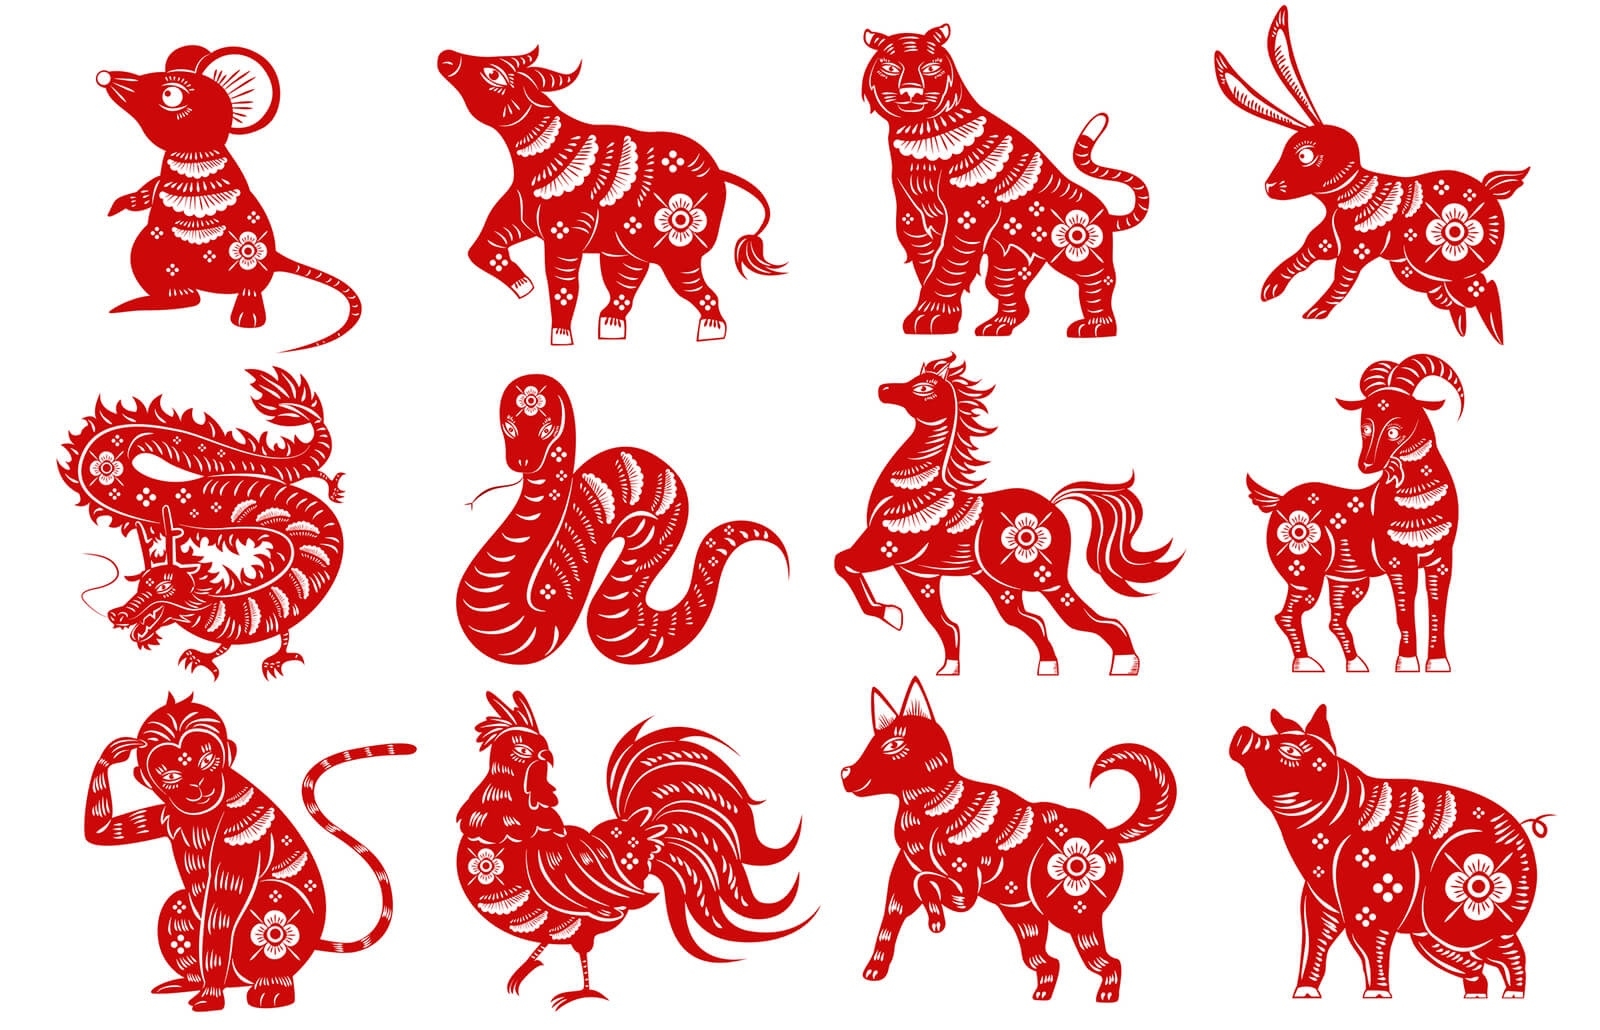 the chinese zodiac igns in order